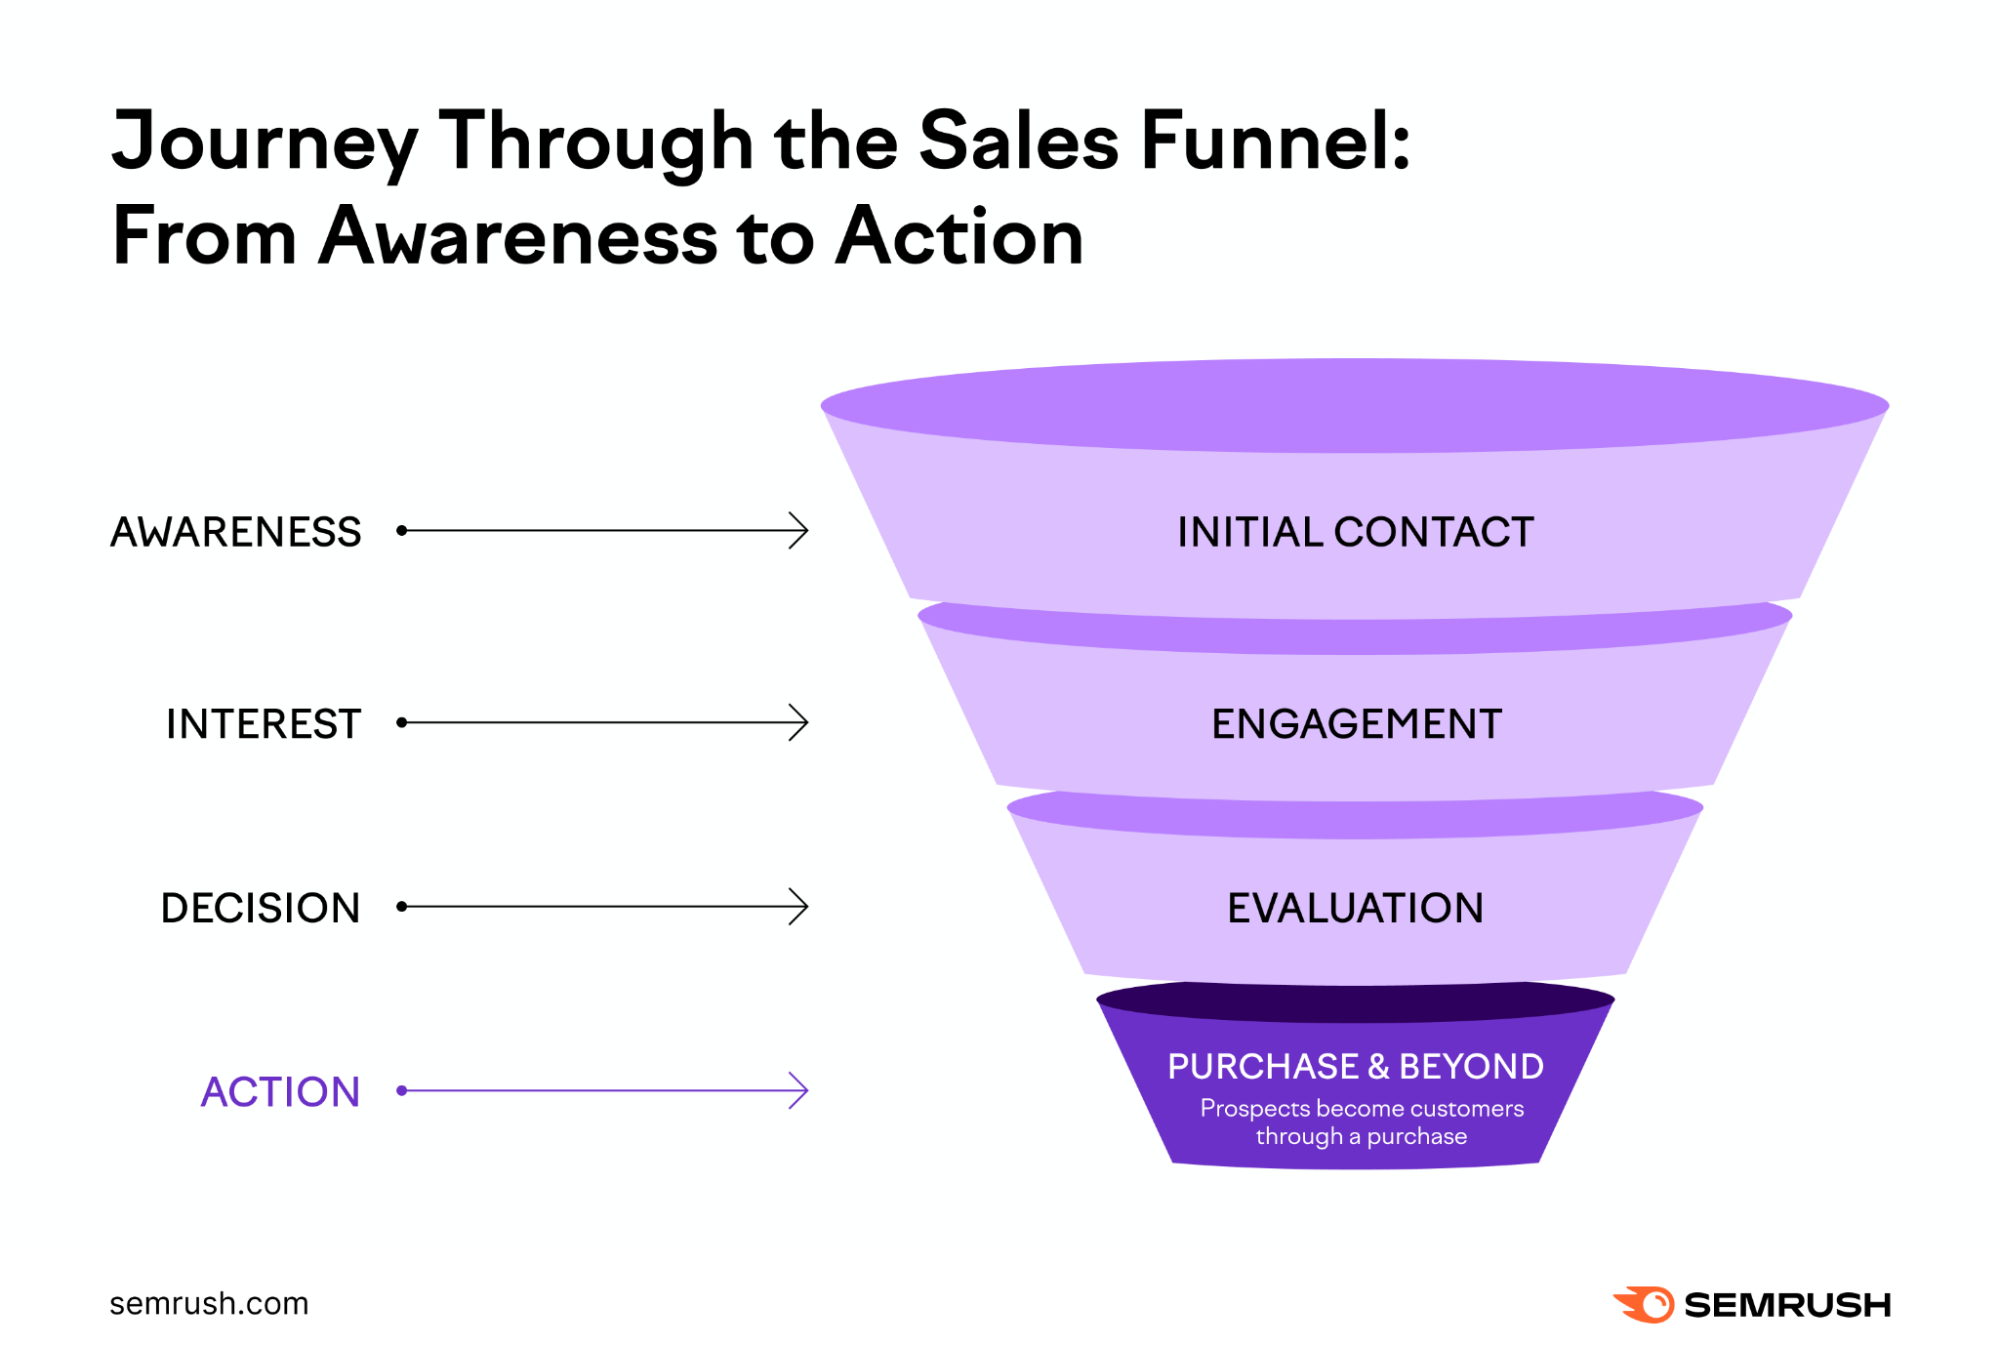 An infographic showing a sales funnel: from awareness to action, with "action" highlighted